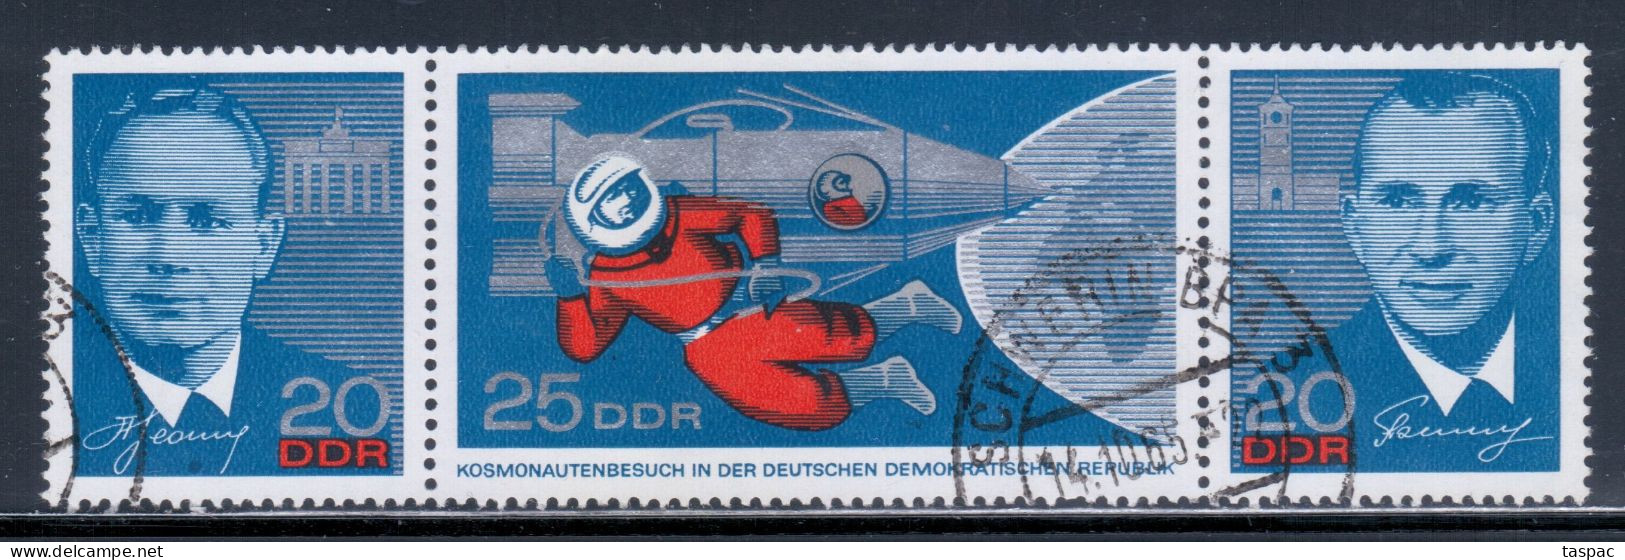 East Germany / DDR 1965 Mi# 1138-1140 Used - Strip Of 3 - Visit Of The Russian Cosmonauts / Space - Used Stamps